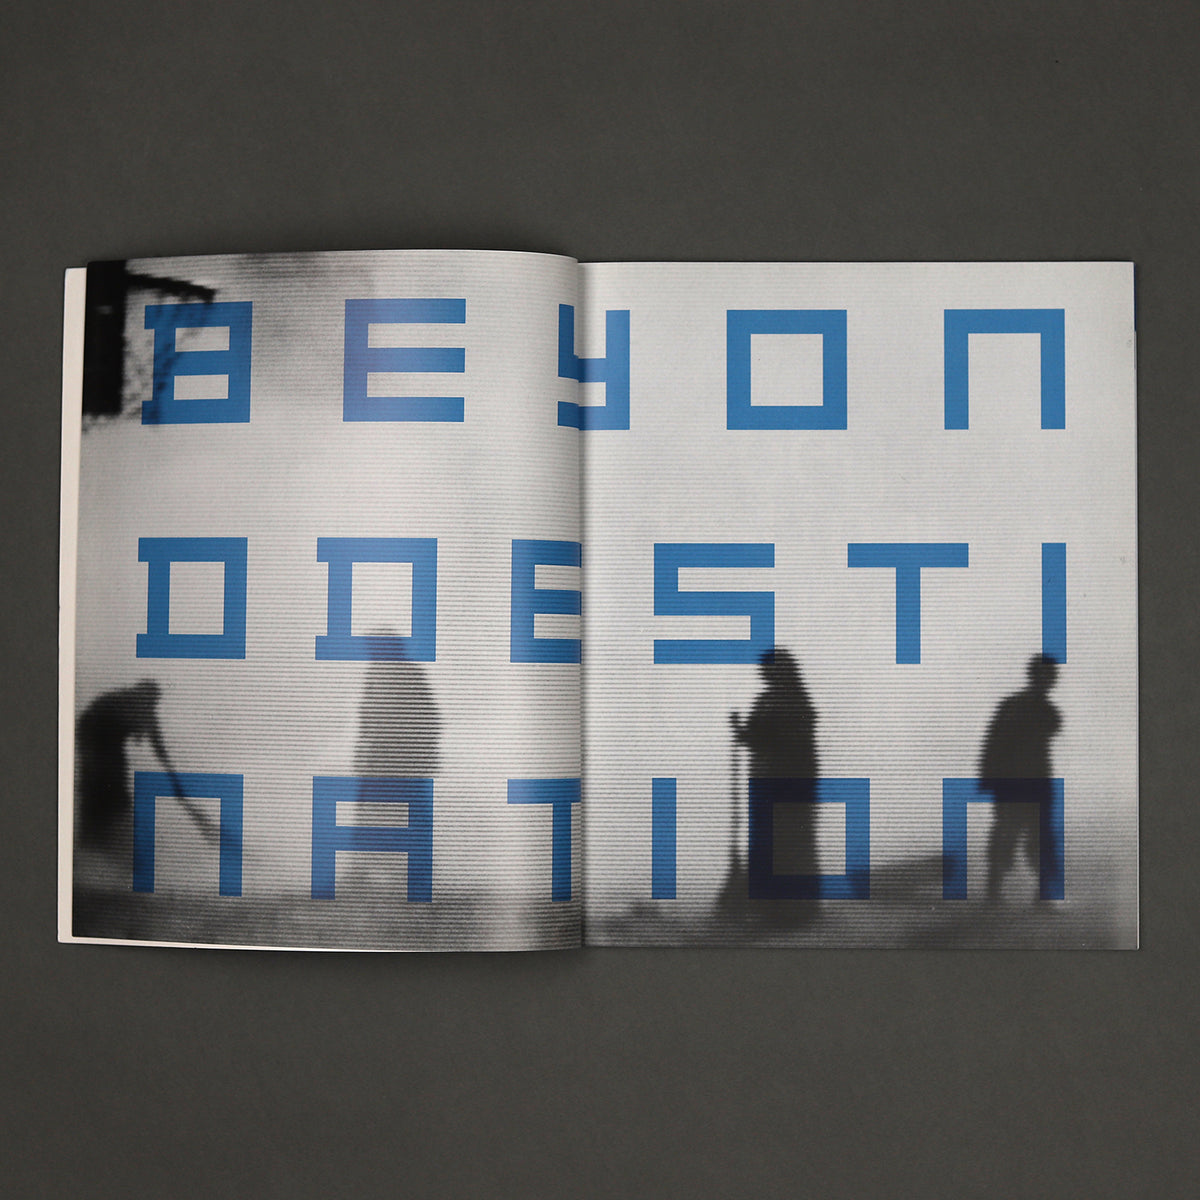 Beyond Destination: Video, Film and Installation by South Asian Artists